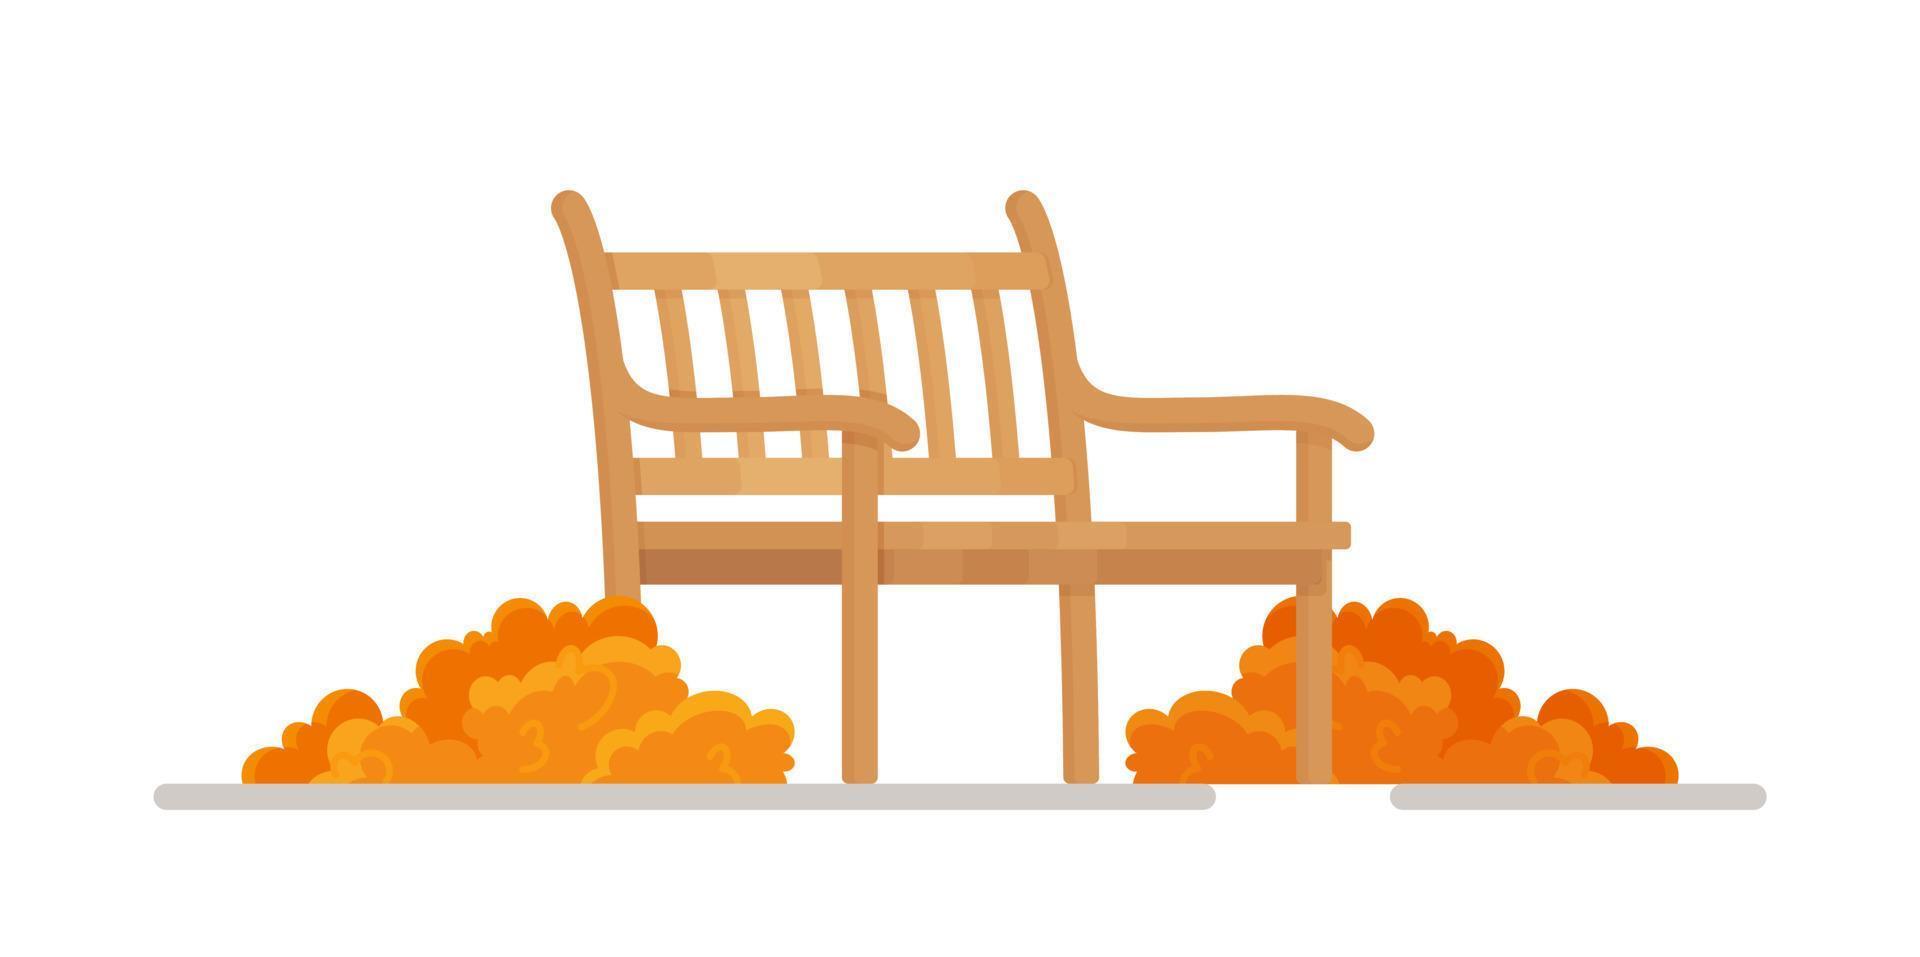 Wooden bench with two piles of dry leaves - a place of rest and relaxation in the park, outside. Vector illustration of an autumn walk.